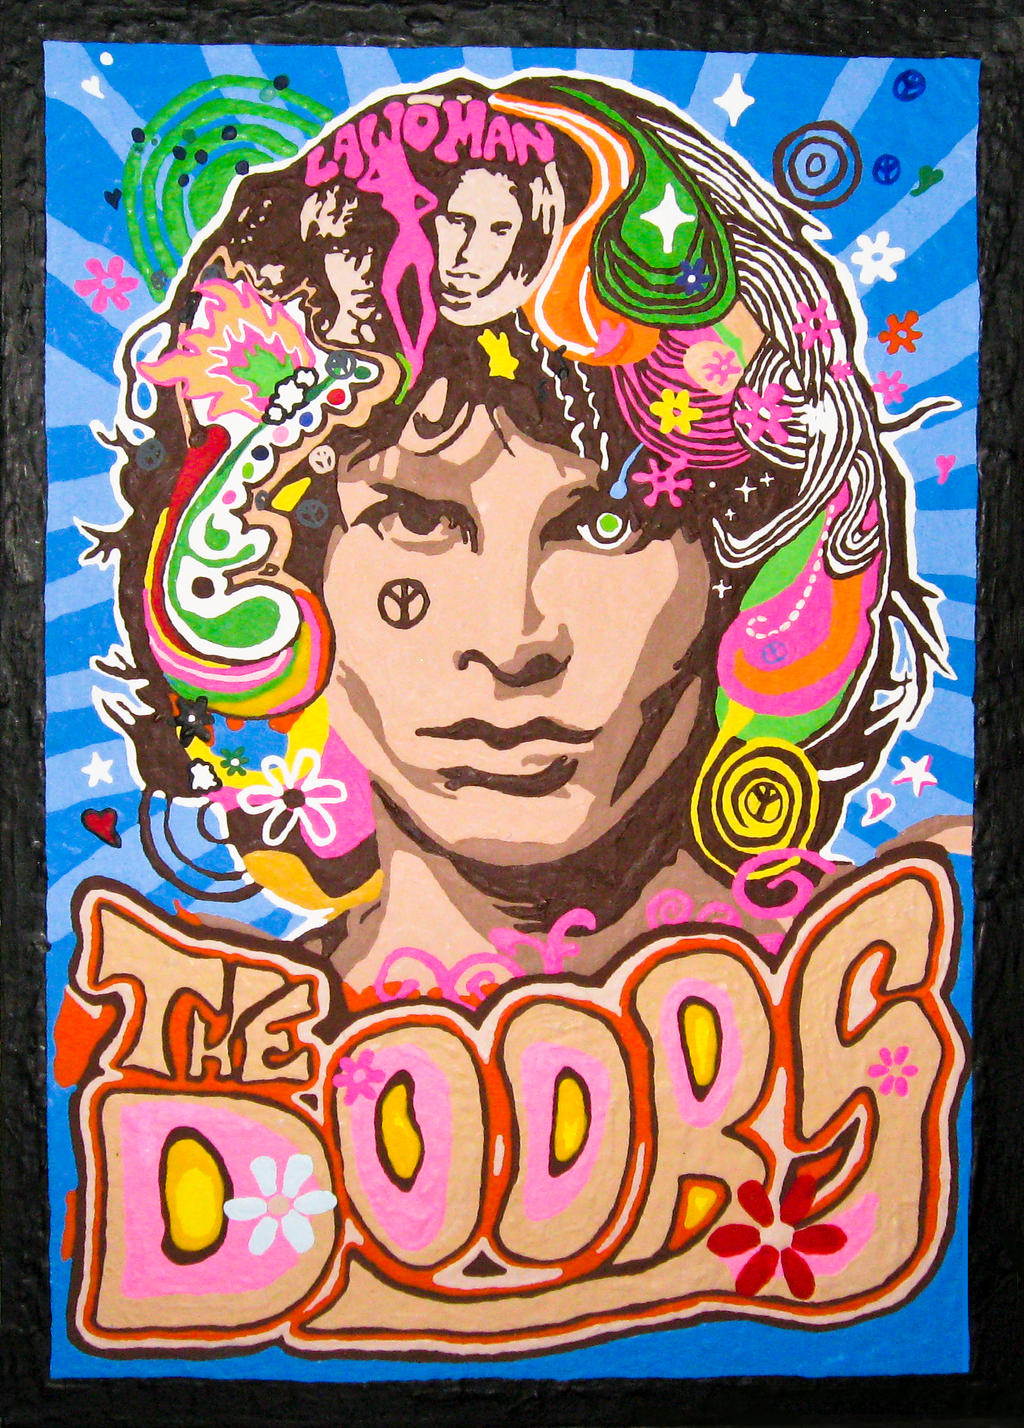 The Doors by inspirational-dreams on DeviantArt